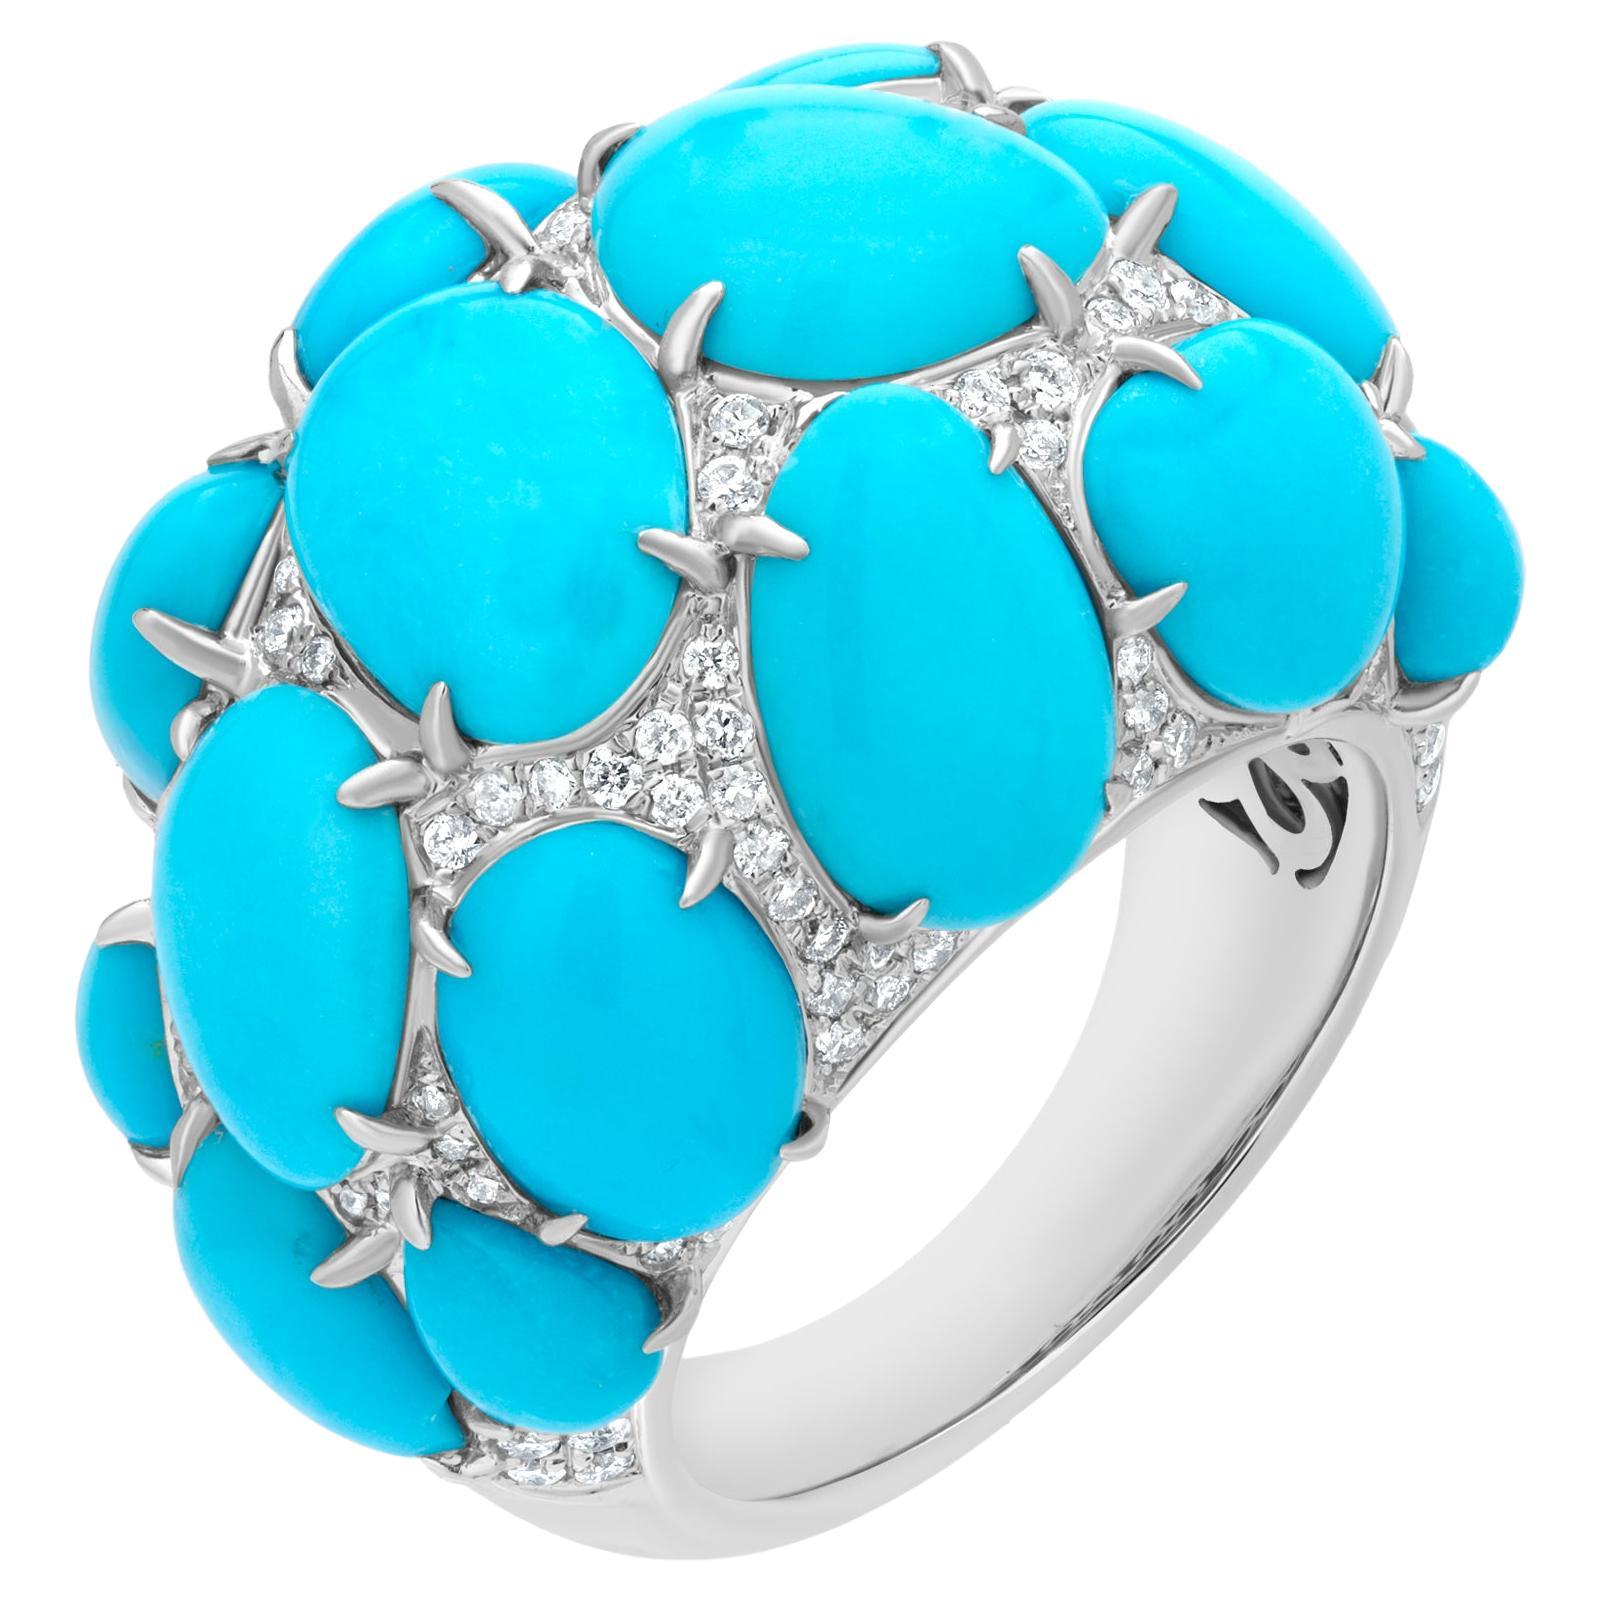 Gemistry 14.97 Cttw. Turquoise and Diamond Cluster Dome Ring in 18k White Gold For Sale